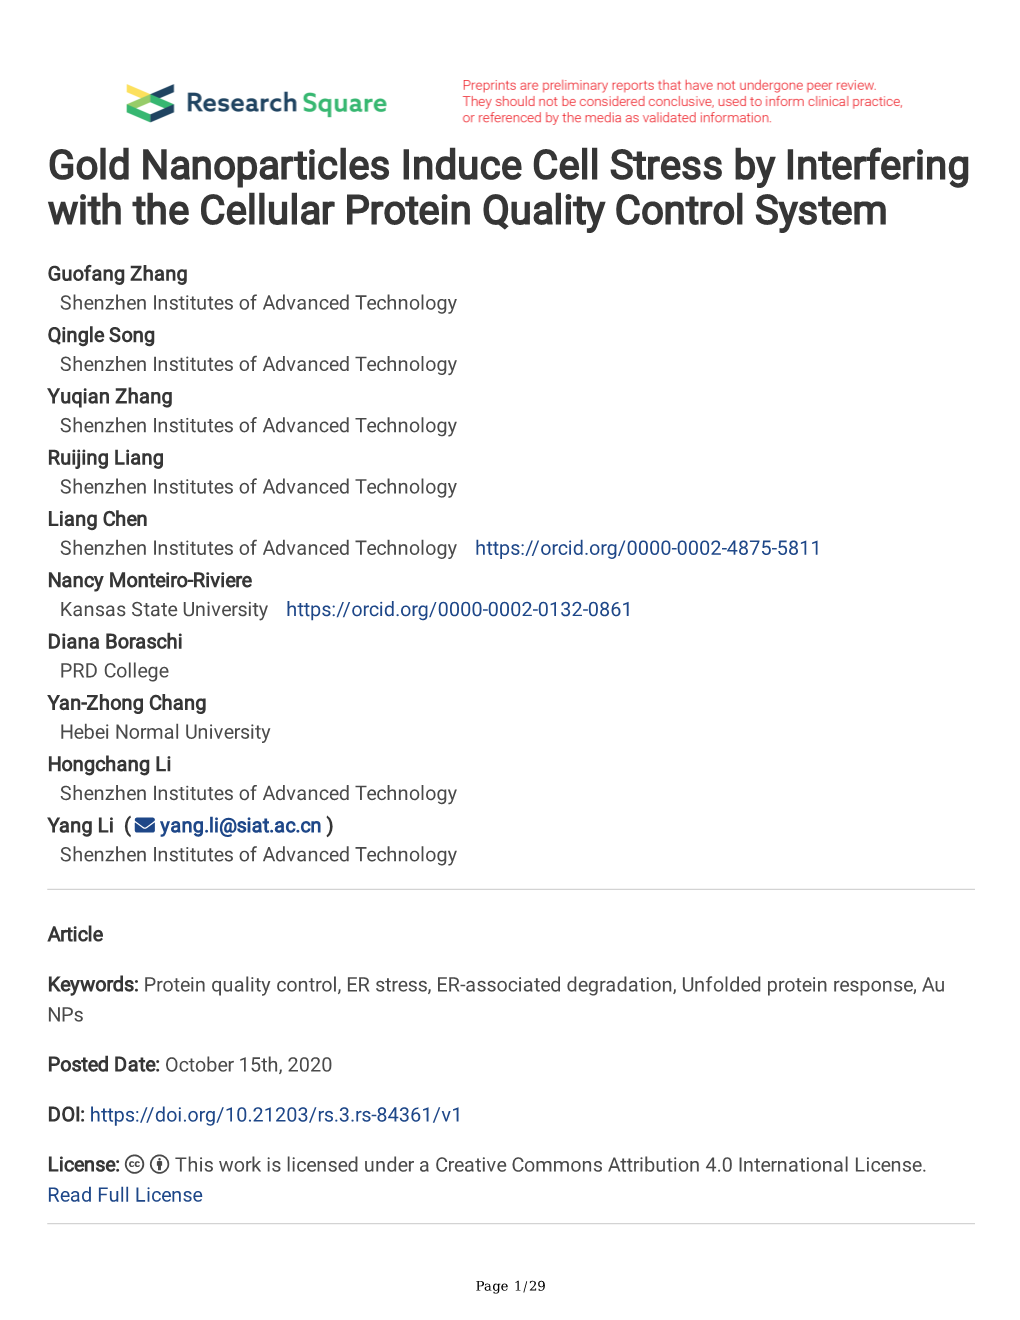 Gold Nanoparticles Induce Cell Stress by Interfering with the Cellular Protein Quality Control System